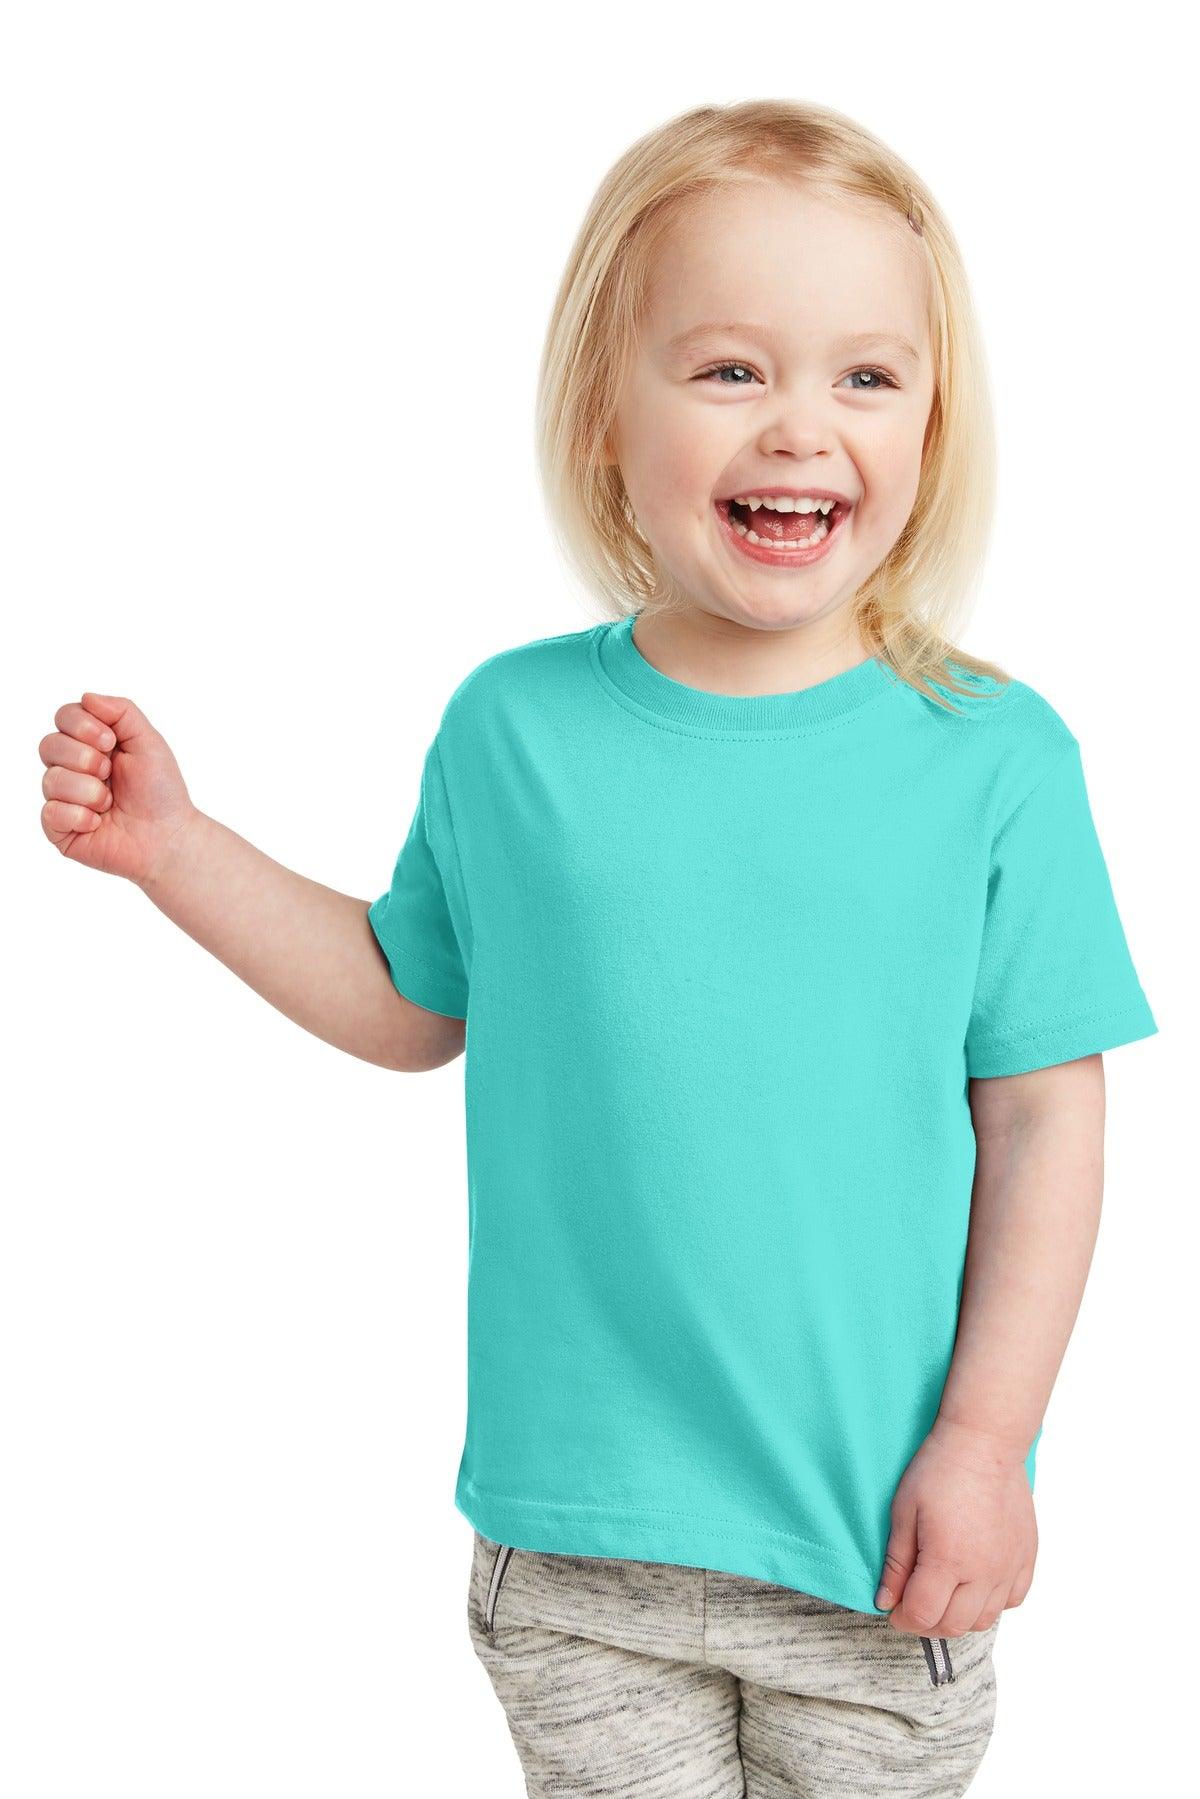 Rabbit Skins Toddler Fine Jersey Tee. RS3321 - Dresses Max